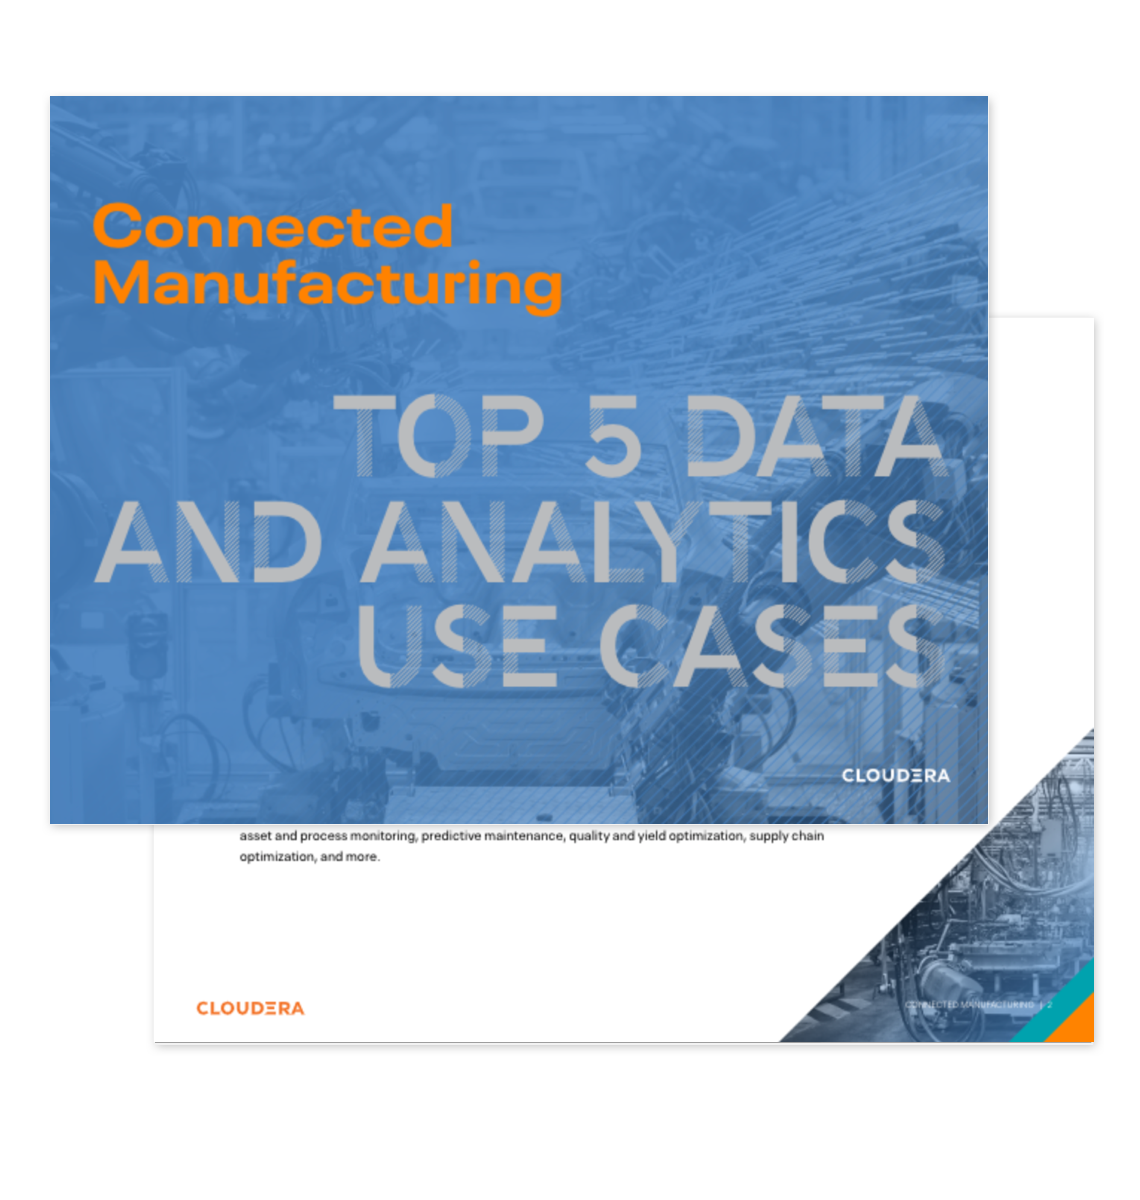 Thumbnail of top data analytics use cases